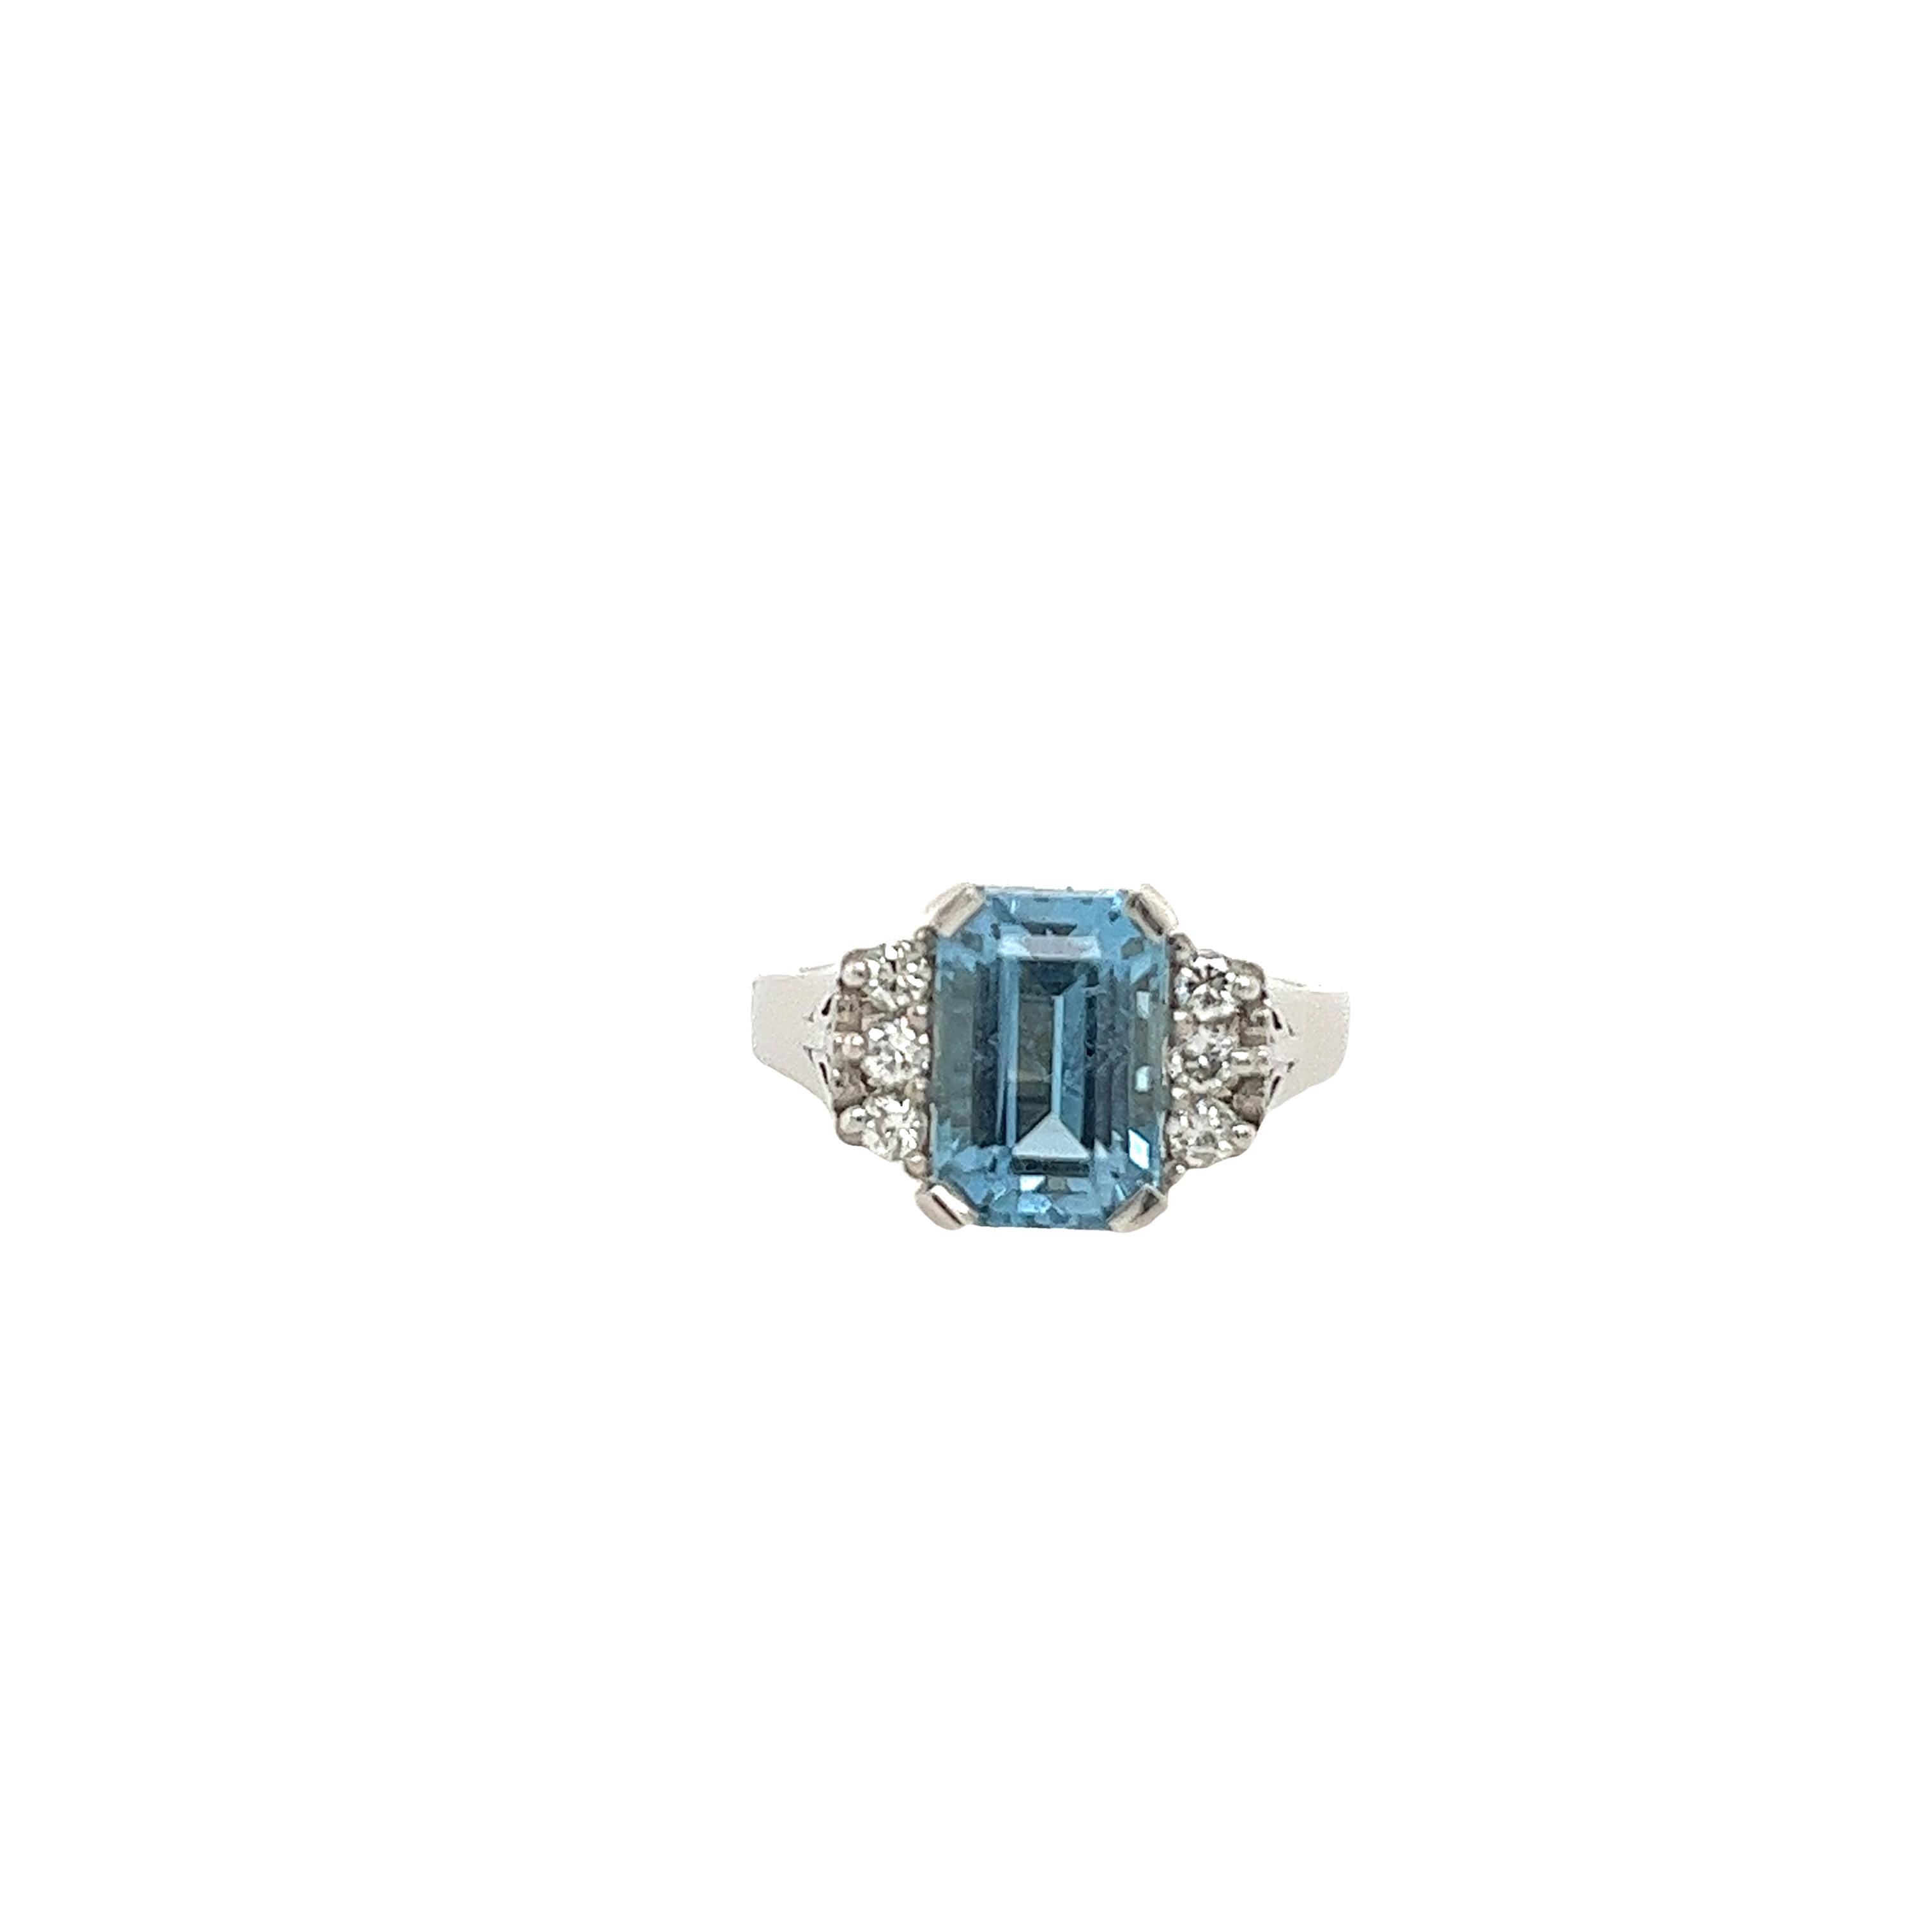 Triple AAA Emerald Cut 3.10ct Aquamarine Ring w/ 3 Diamonds on Sides in Platinum For Sale 2